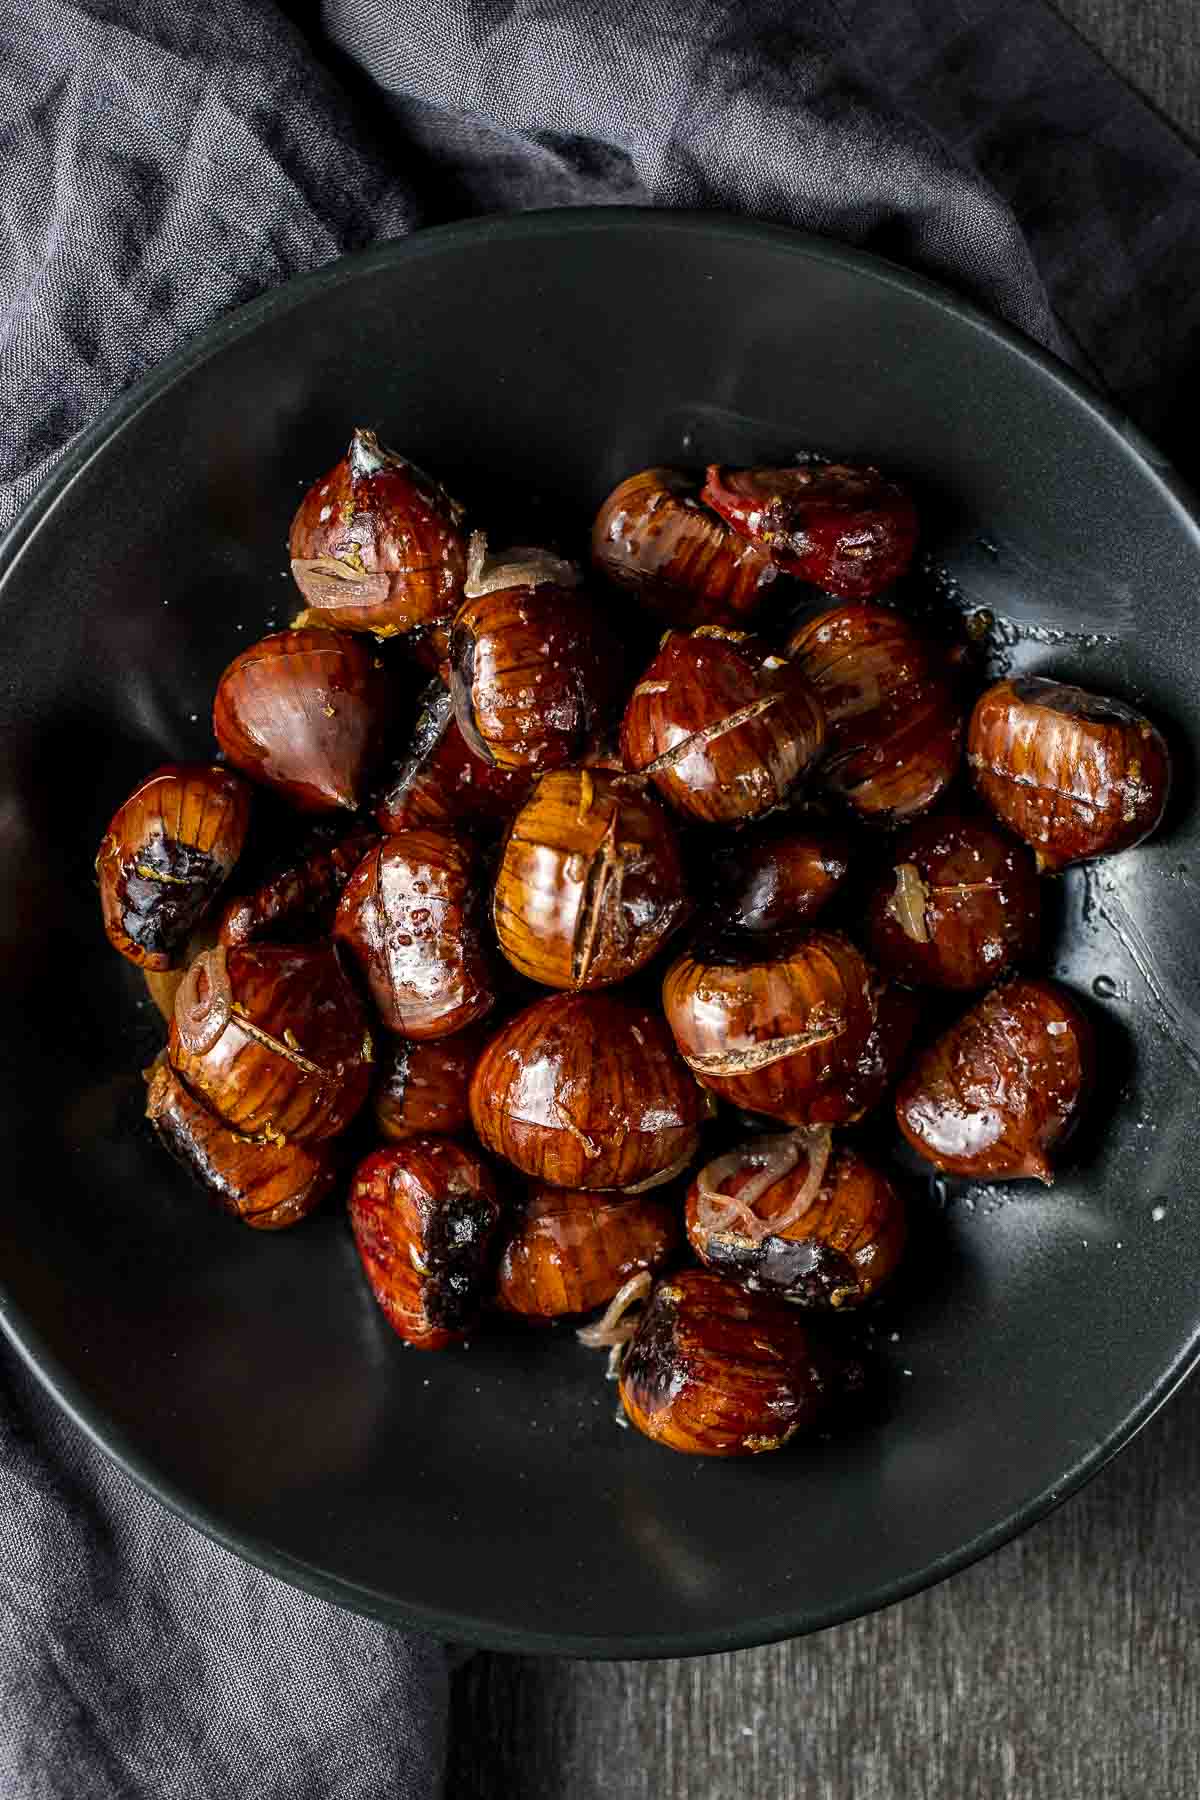 roasted chestnuts in a bowl